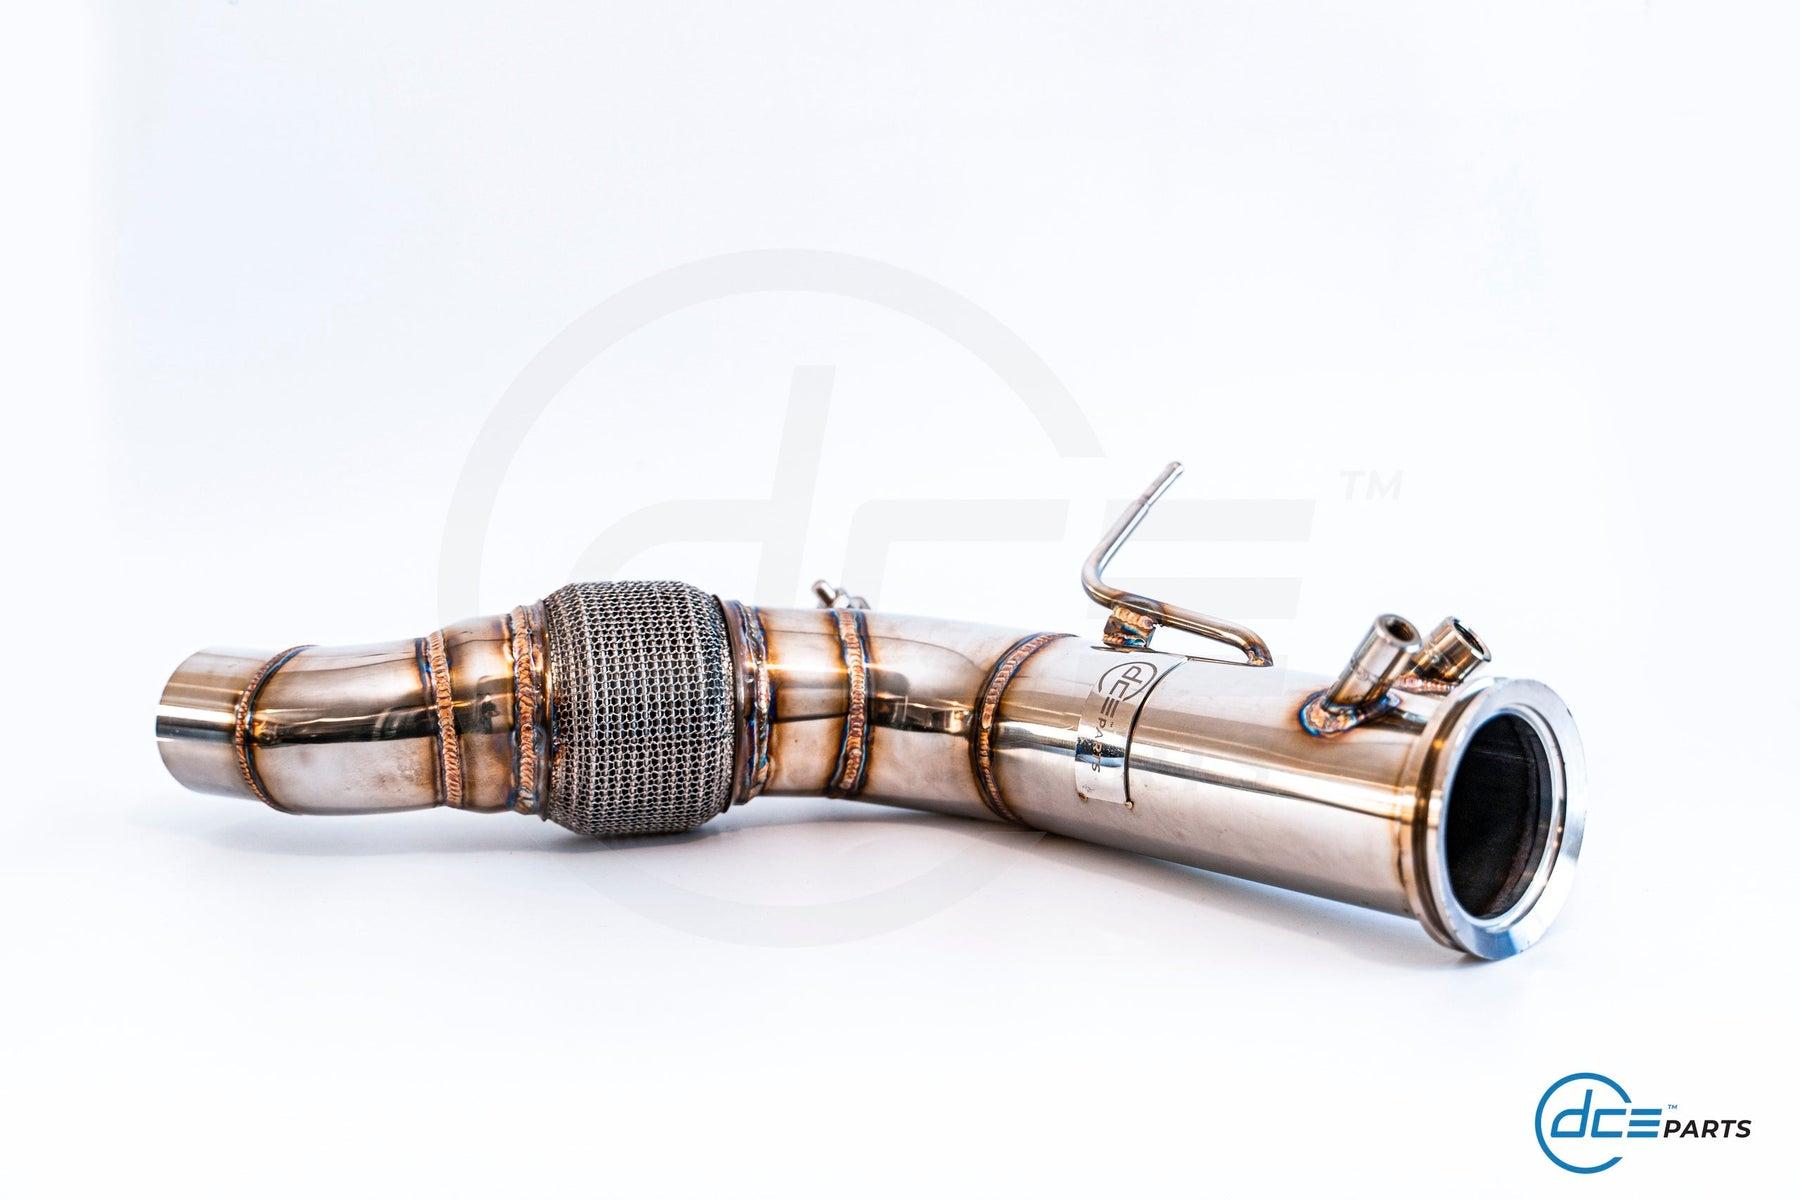 BMW Engine N57 DOWNPIPE - Serie 3 / Serie 4 / Serie 5 / Serie 6 / Serie 7 / X3 / X4 / X5 / X6 - DCE